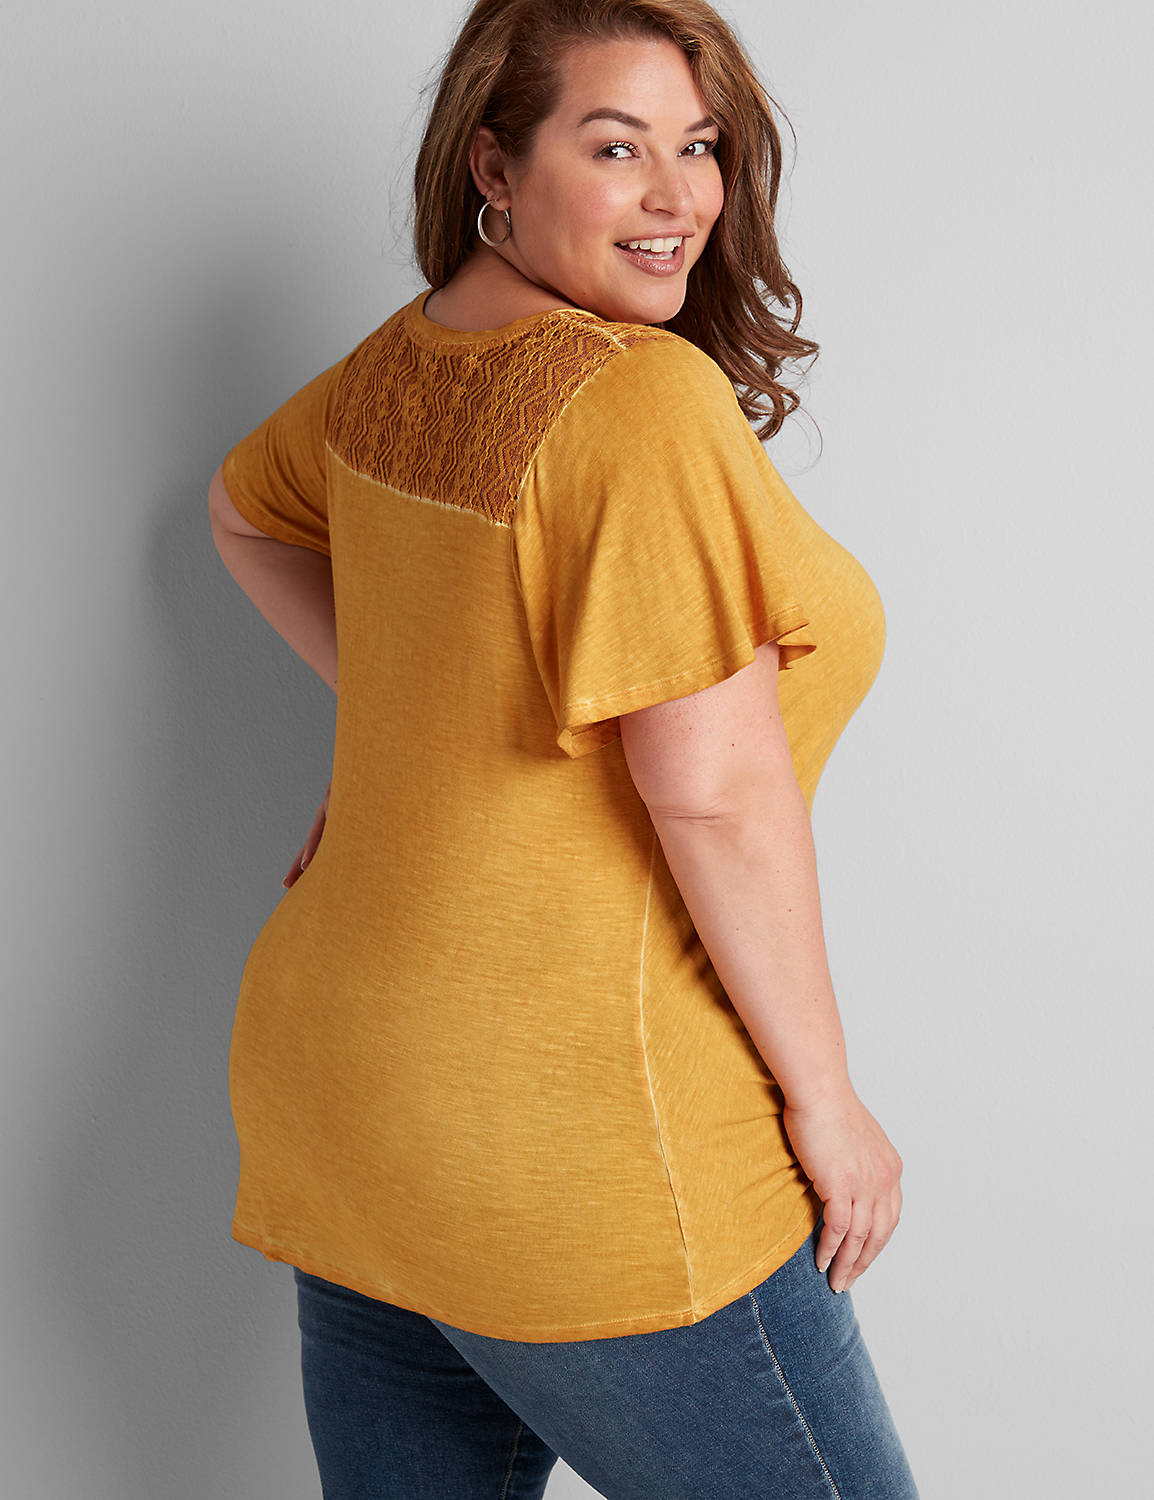 1114067 Short sleeve tee with lace yokes:Yellow:26/28 Product Image 2